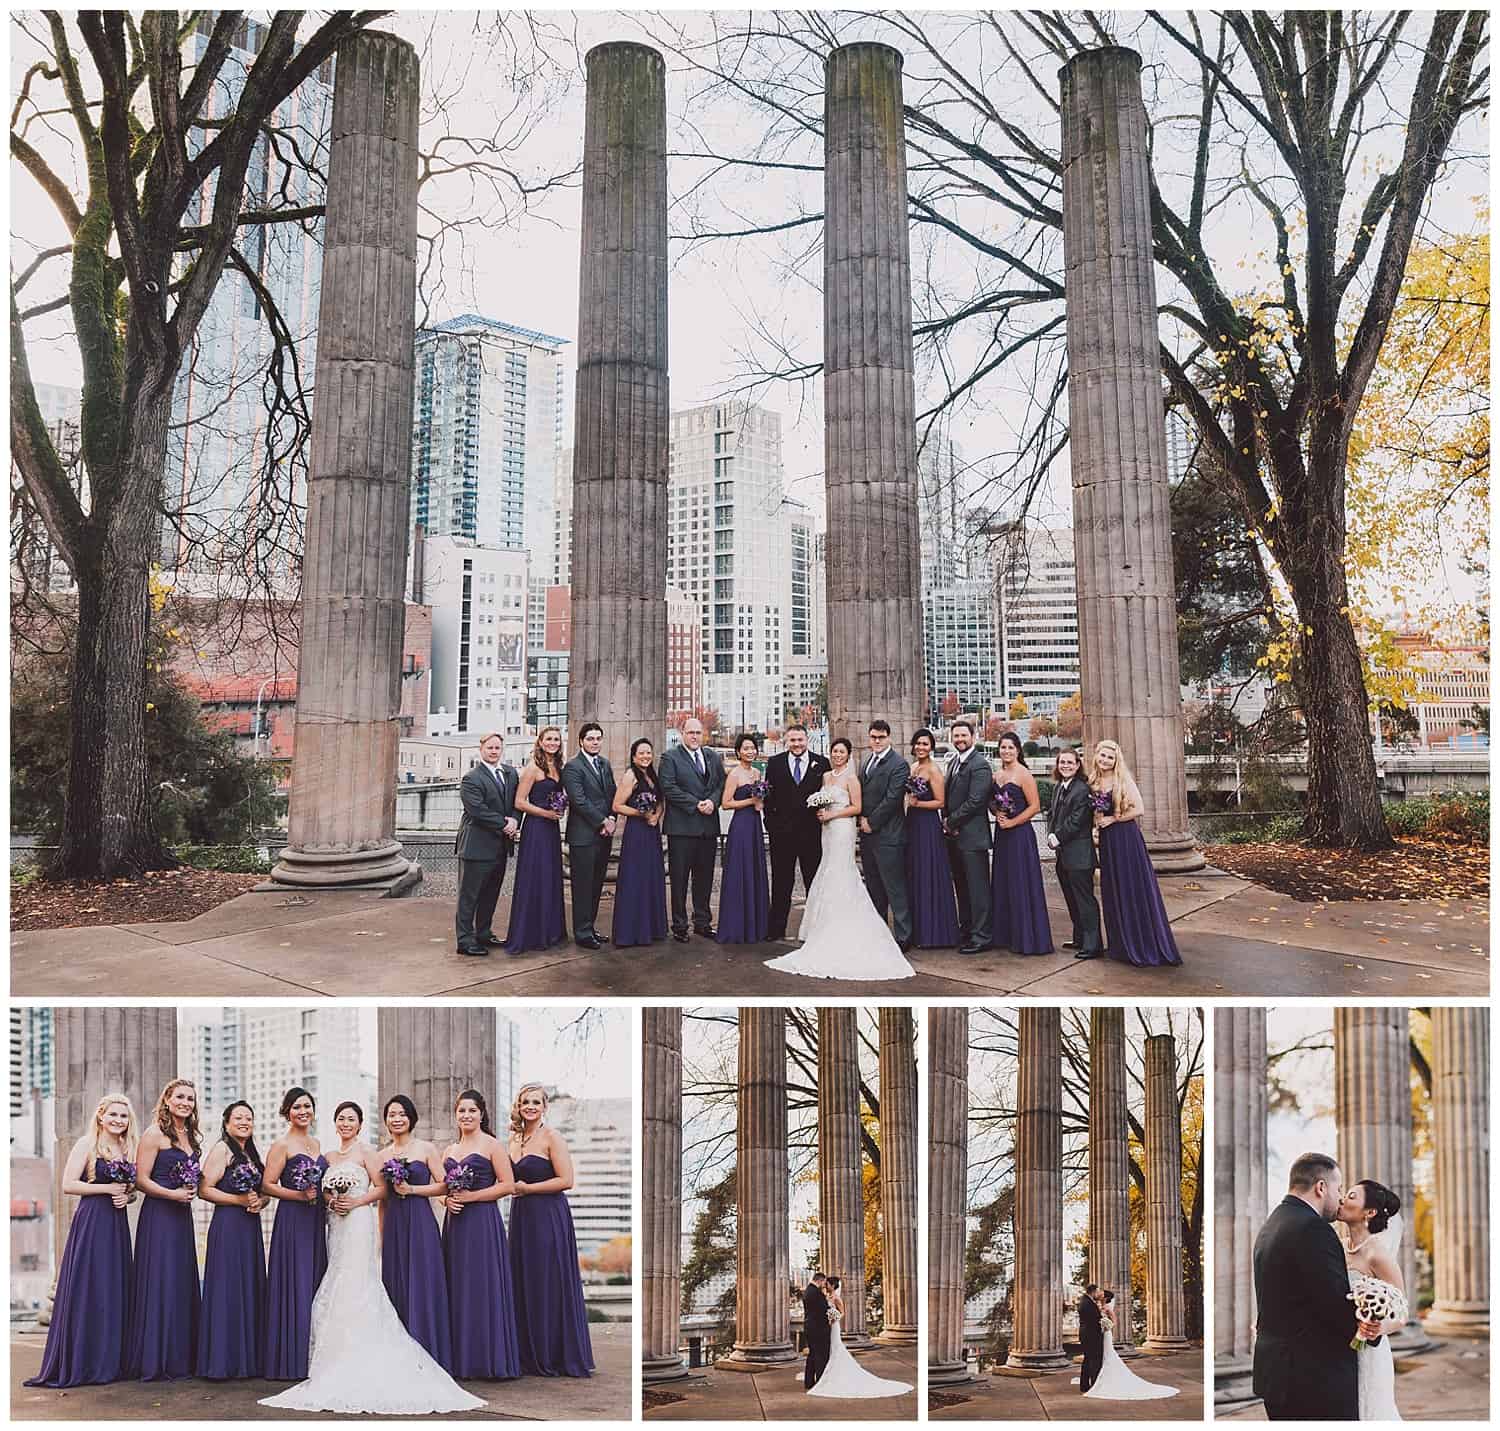 Hotel Sorrento wedding venue in Capitol Hill Seattle by Kyle Goldie of Luma Weddings